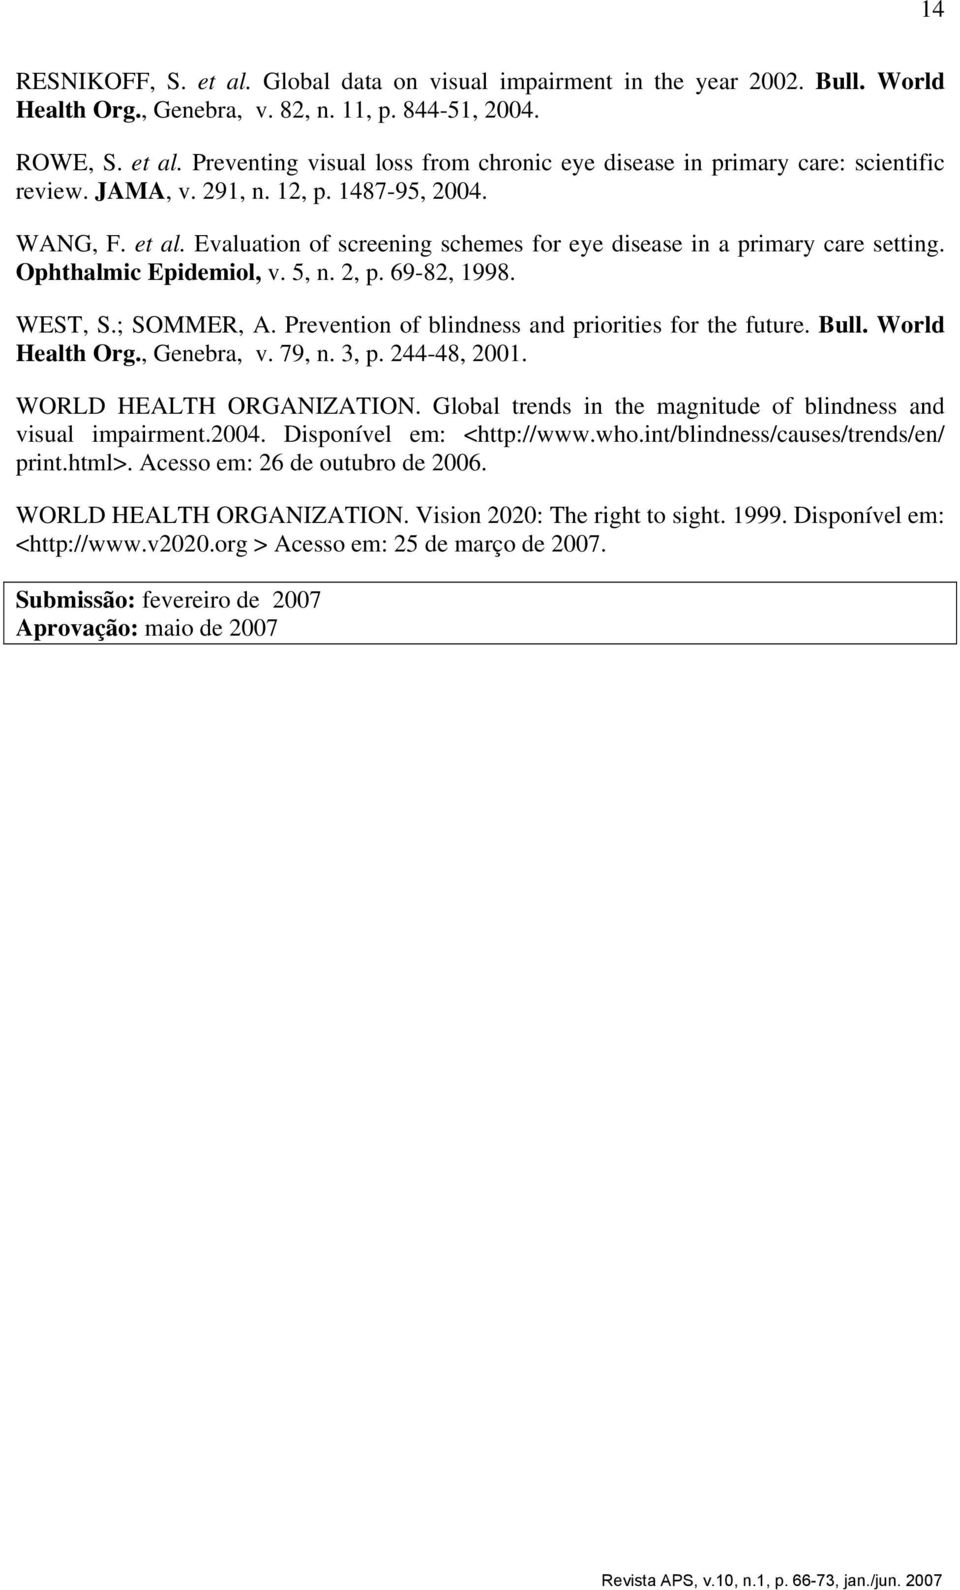 Prevention of blindness and priorities for the future. Bull. World Health Org., Genebra, v. 79, n. 3, p. 244-48, 2001. WORLD HEALTH ORGANIZATION.